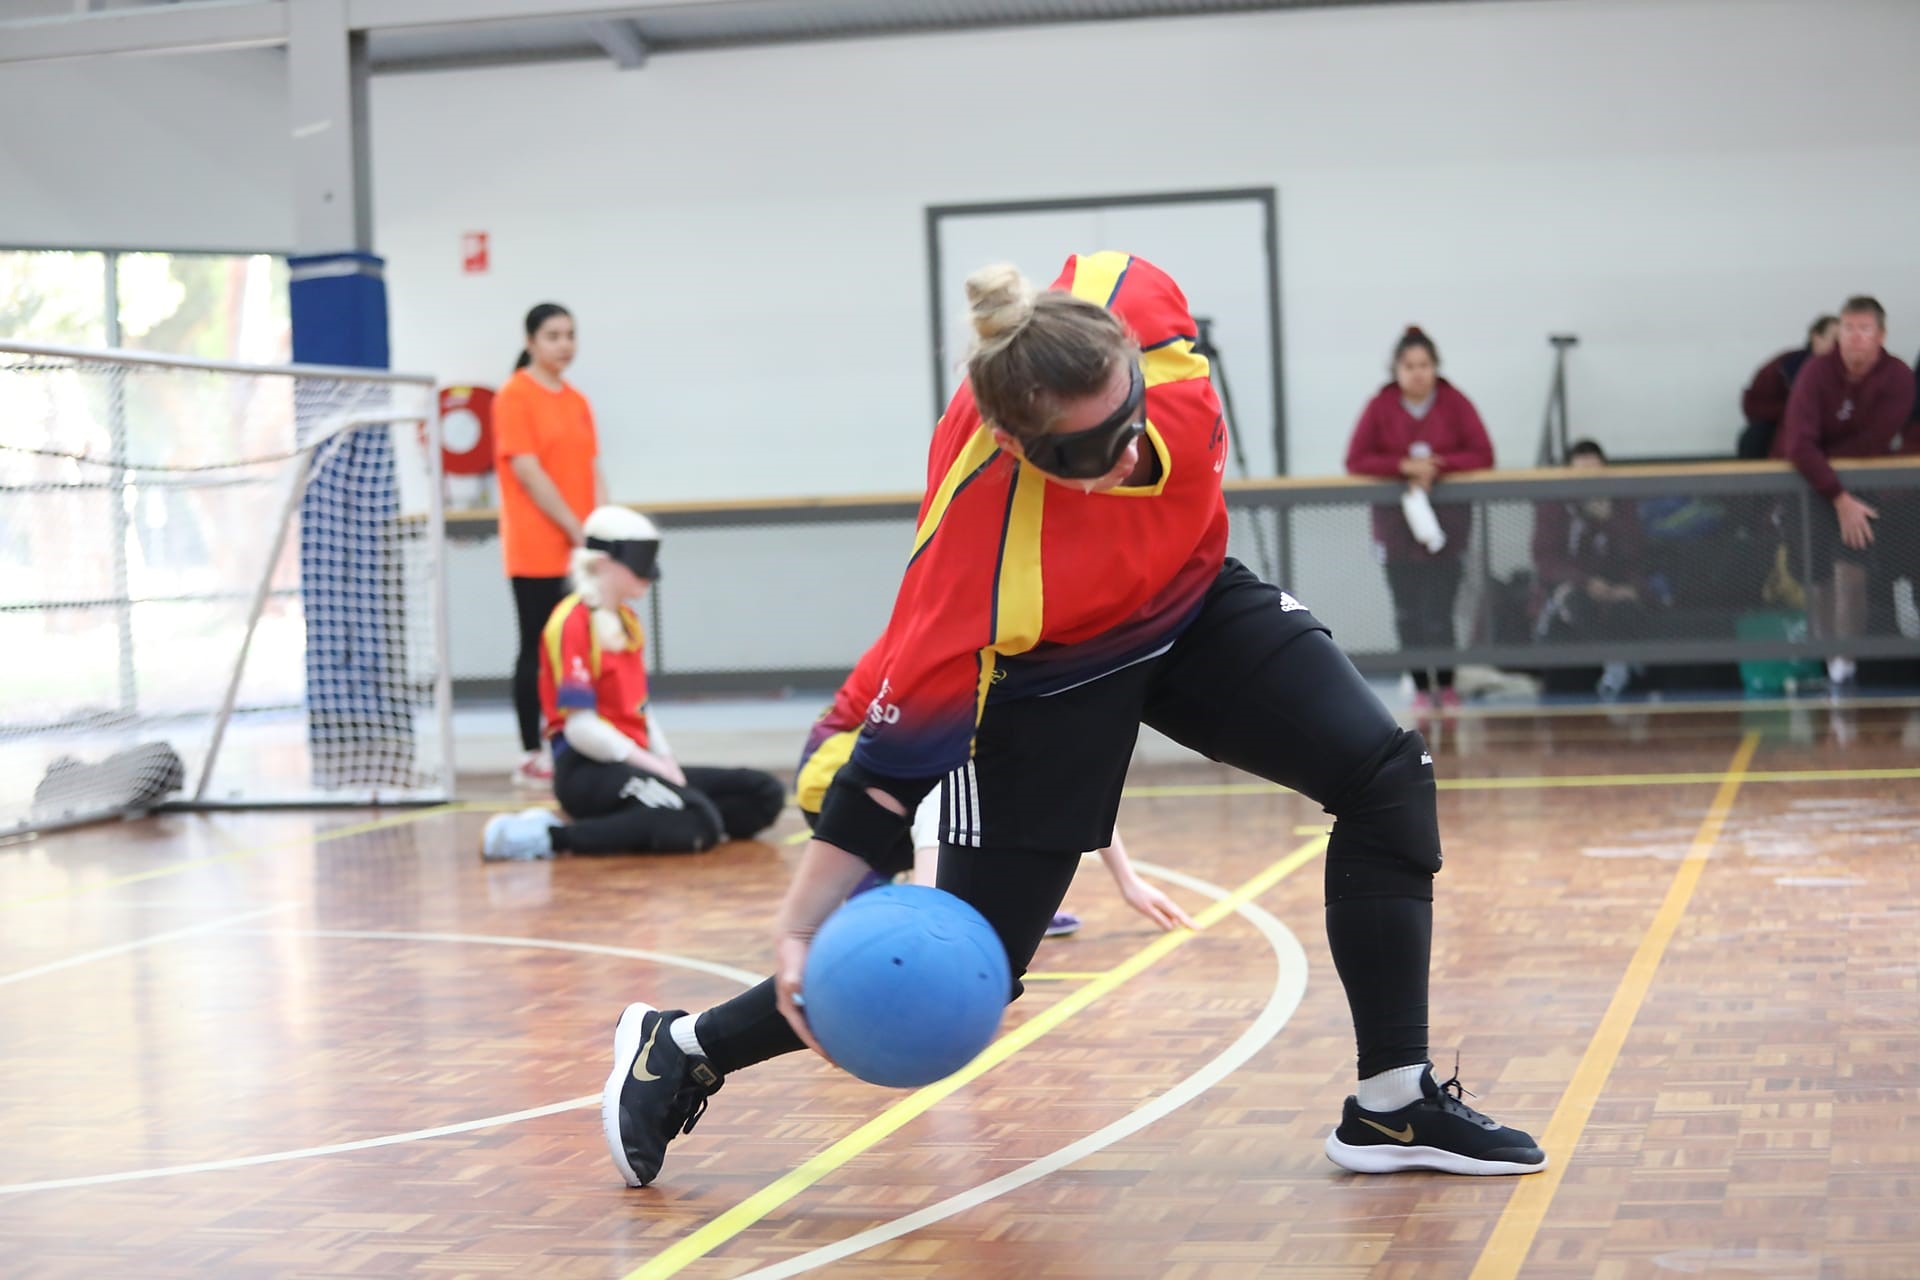 Nikita is wearing a red top and black pants. Her hair is in a bun and she is wearing black glasses. She has stepped her left leg forward and her right leg back. She is holding a blue ball in her right hand. 